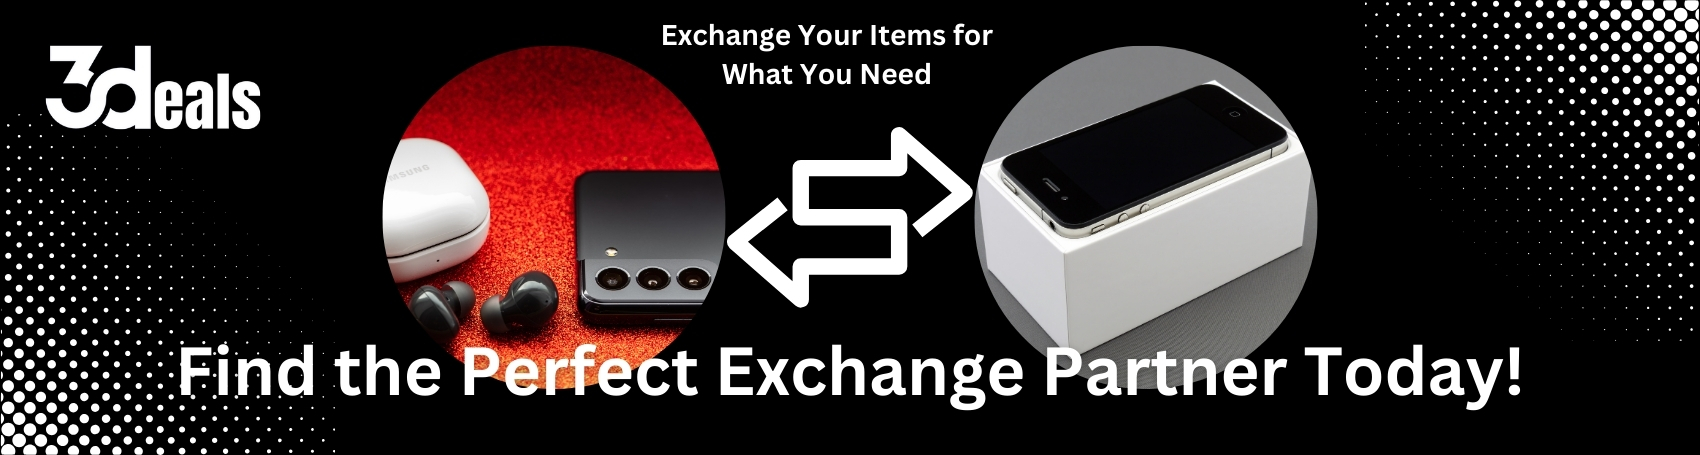 Exchange your items fast and easy